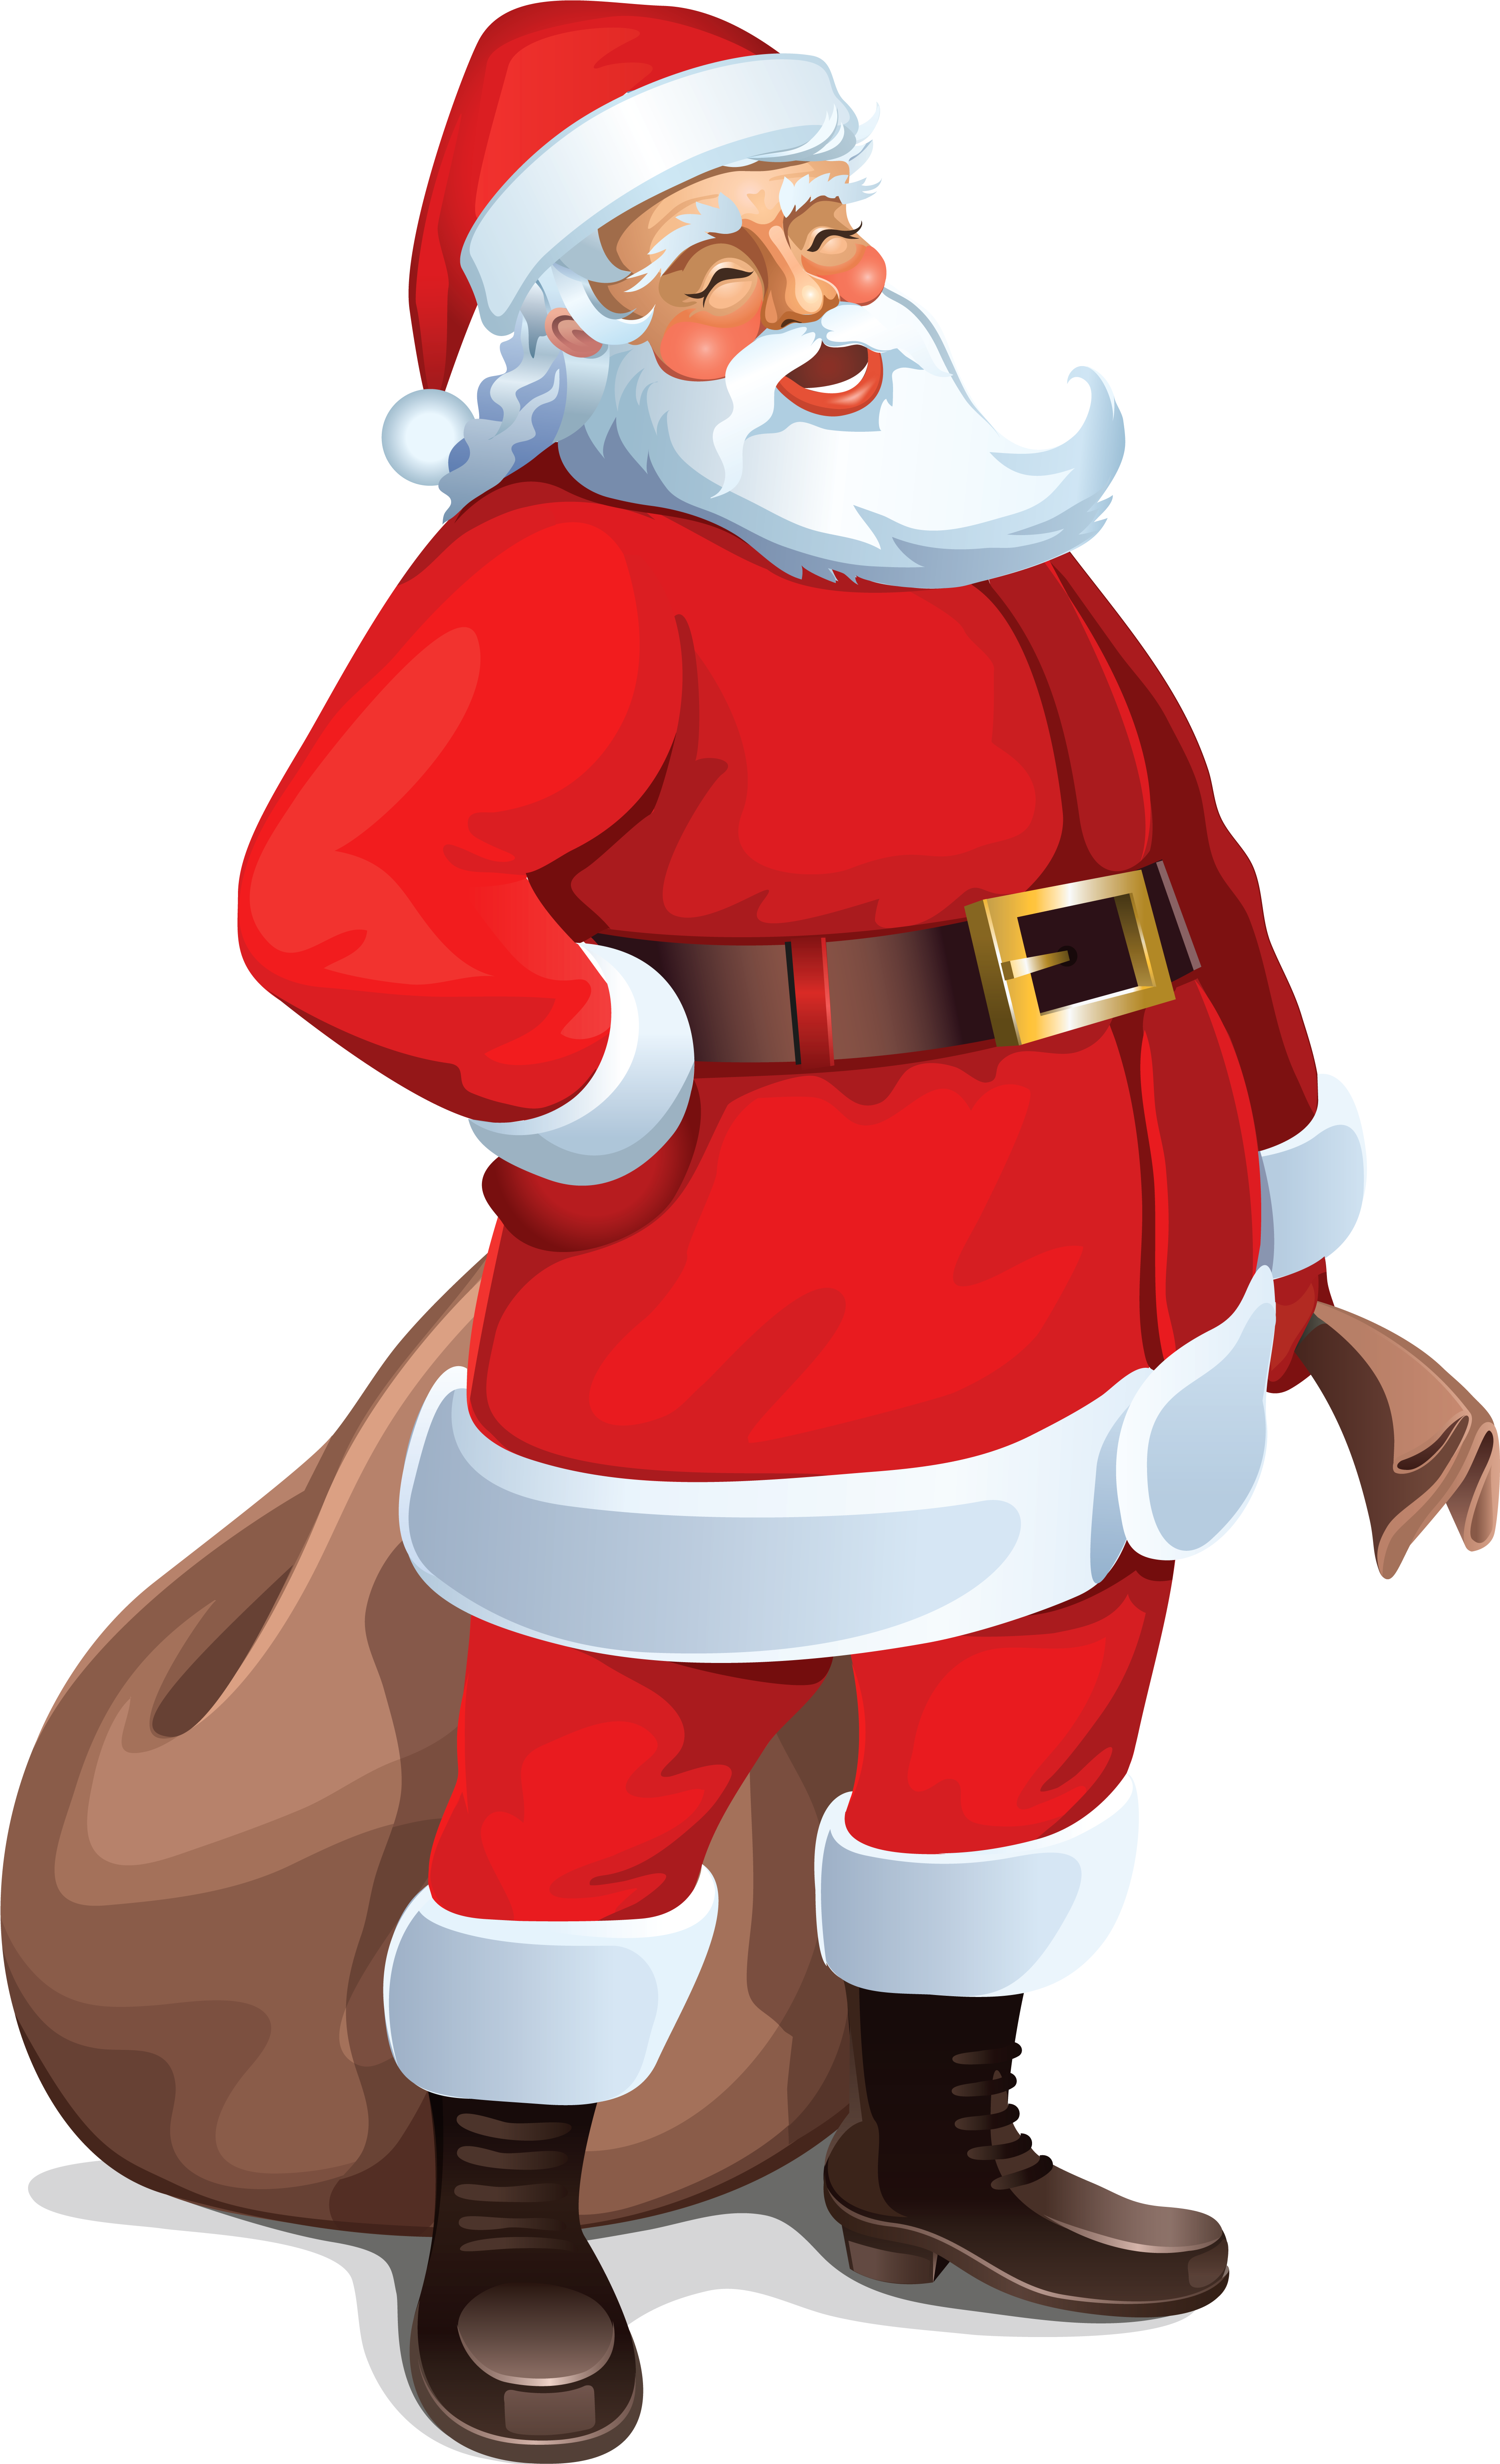 Urgent Free Pictures Of Santa Claus With Green Bag - Santa Claus Png (3830x6238)